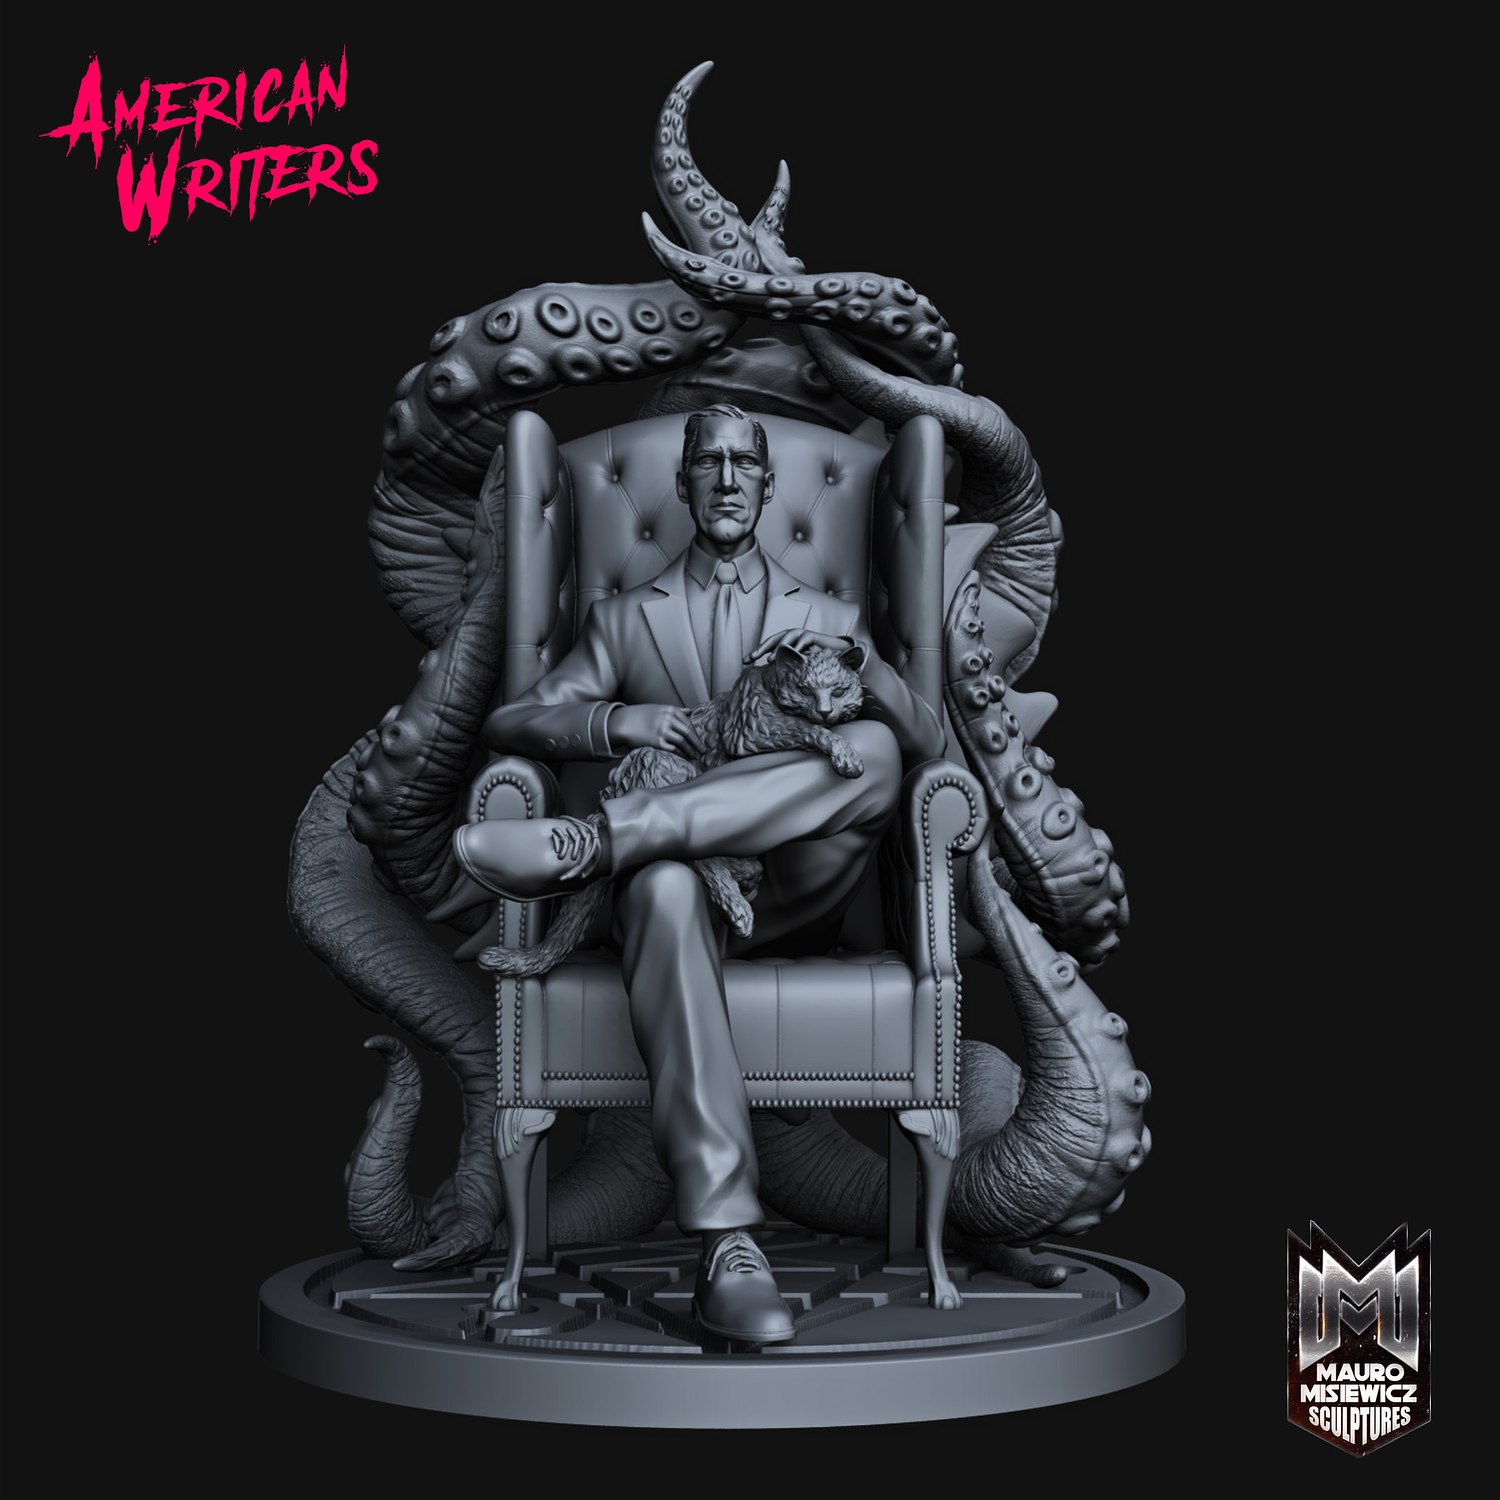 Howard Phillips Lovecraft - The American Writer